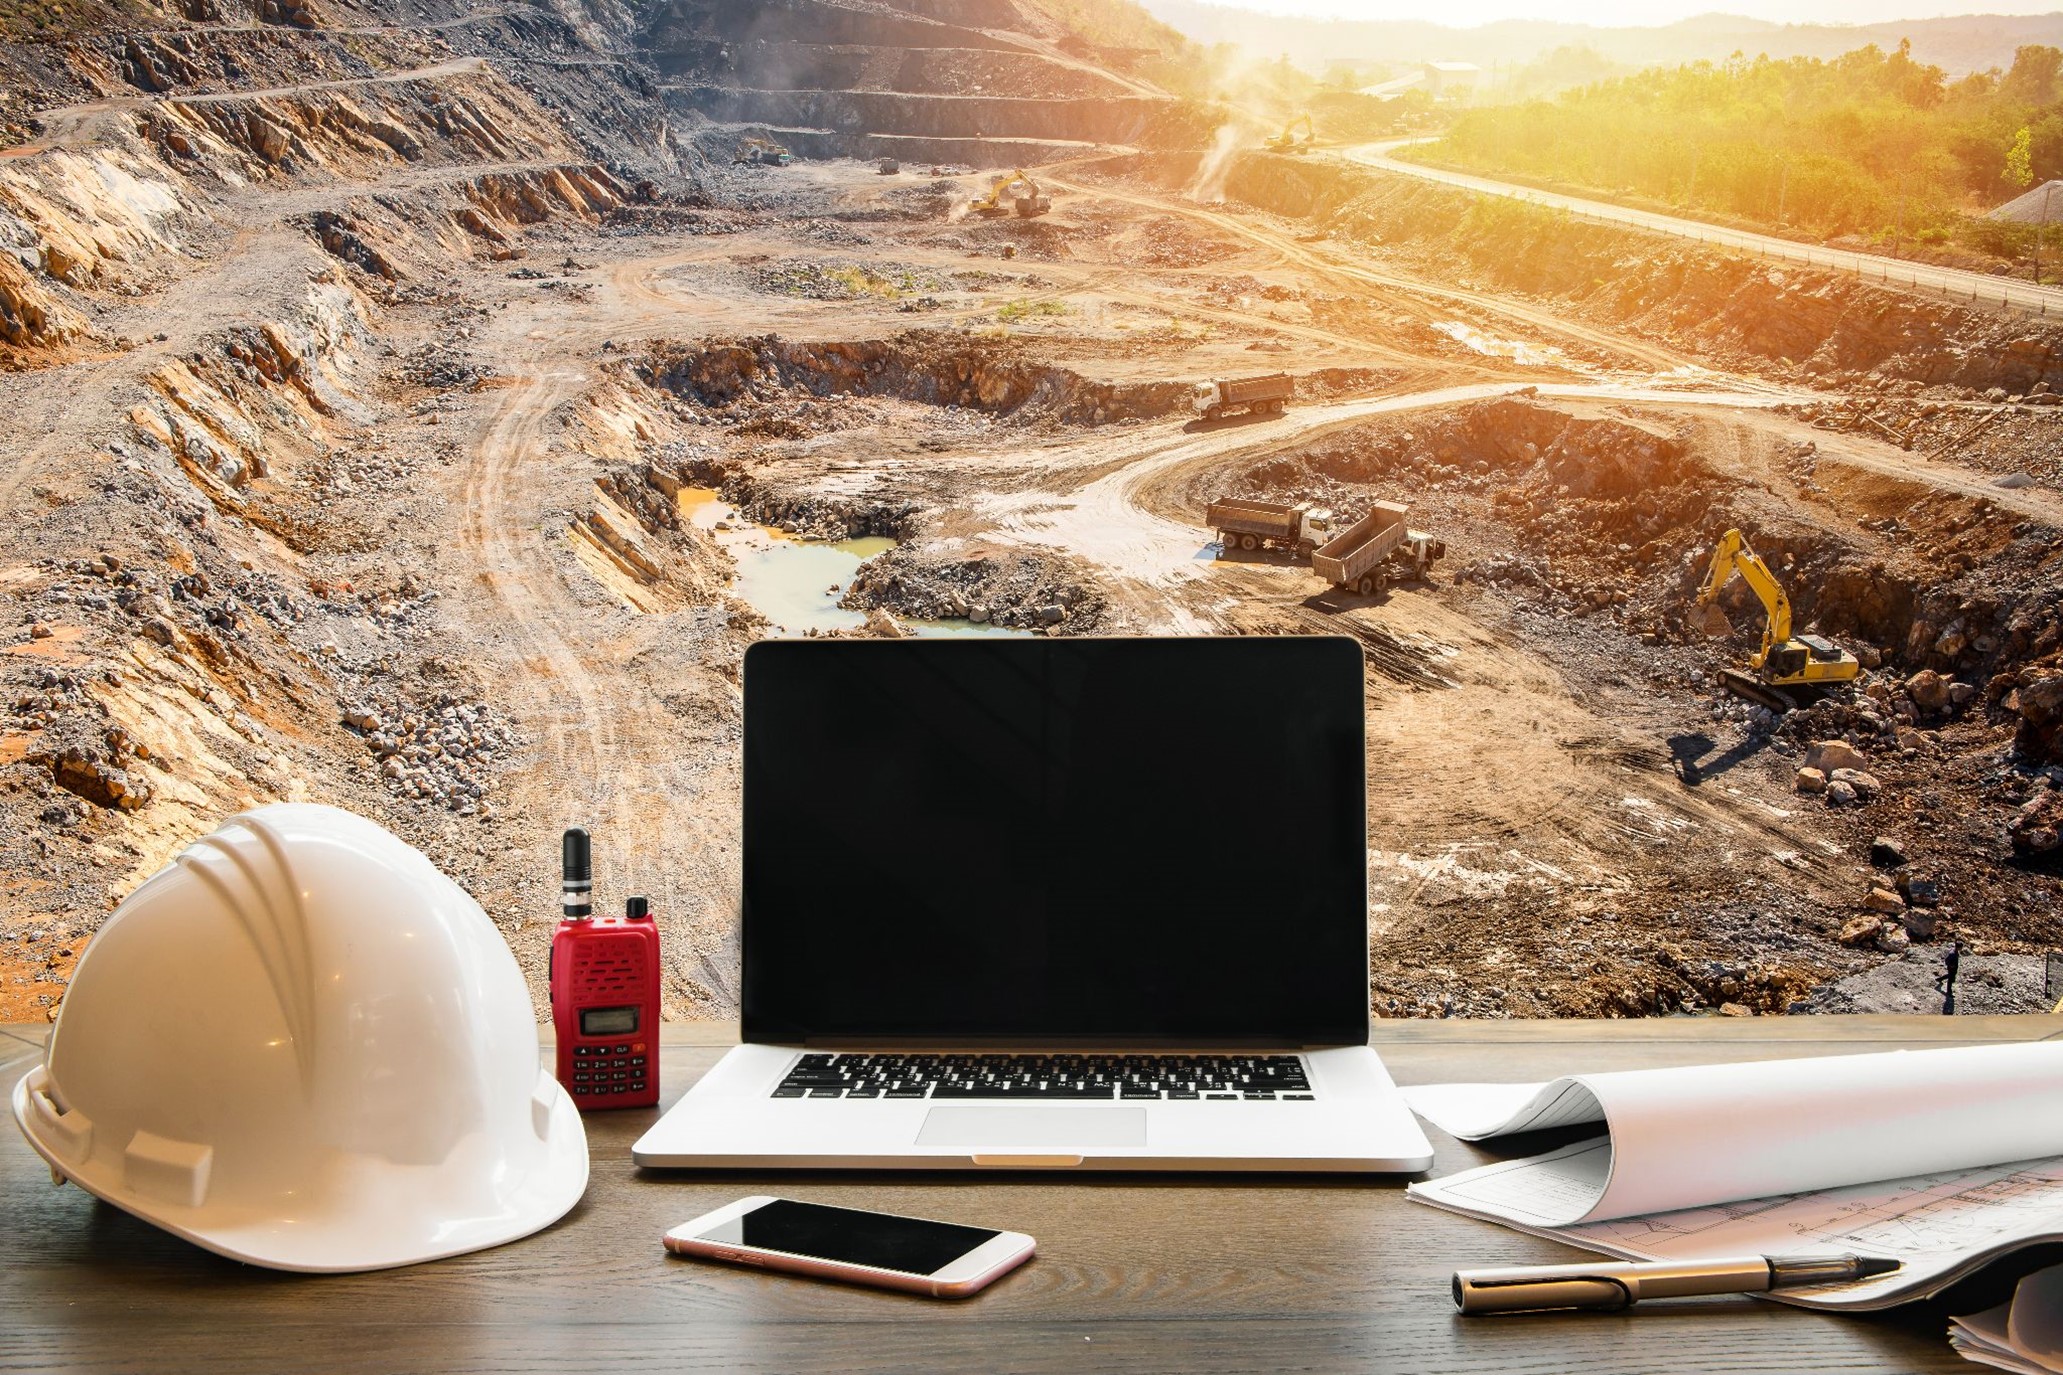 Mineware Consulting Mine Management Software